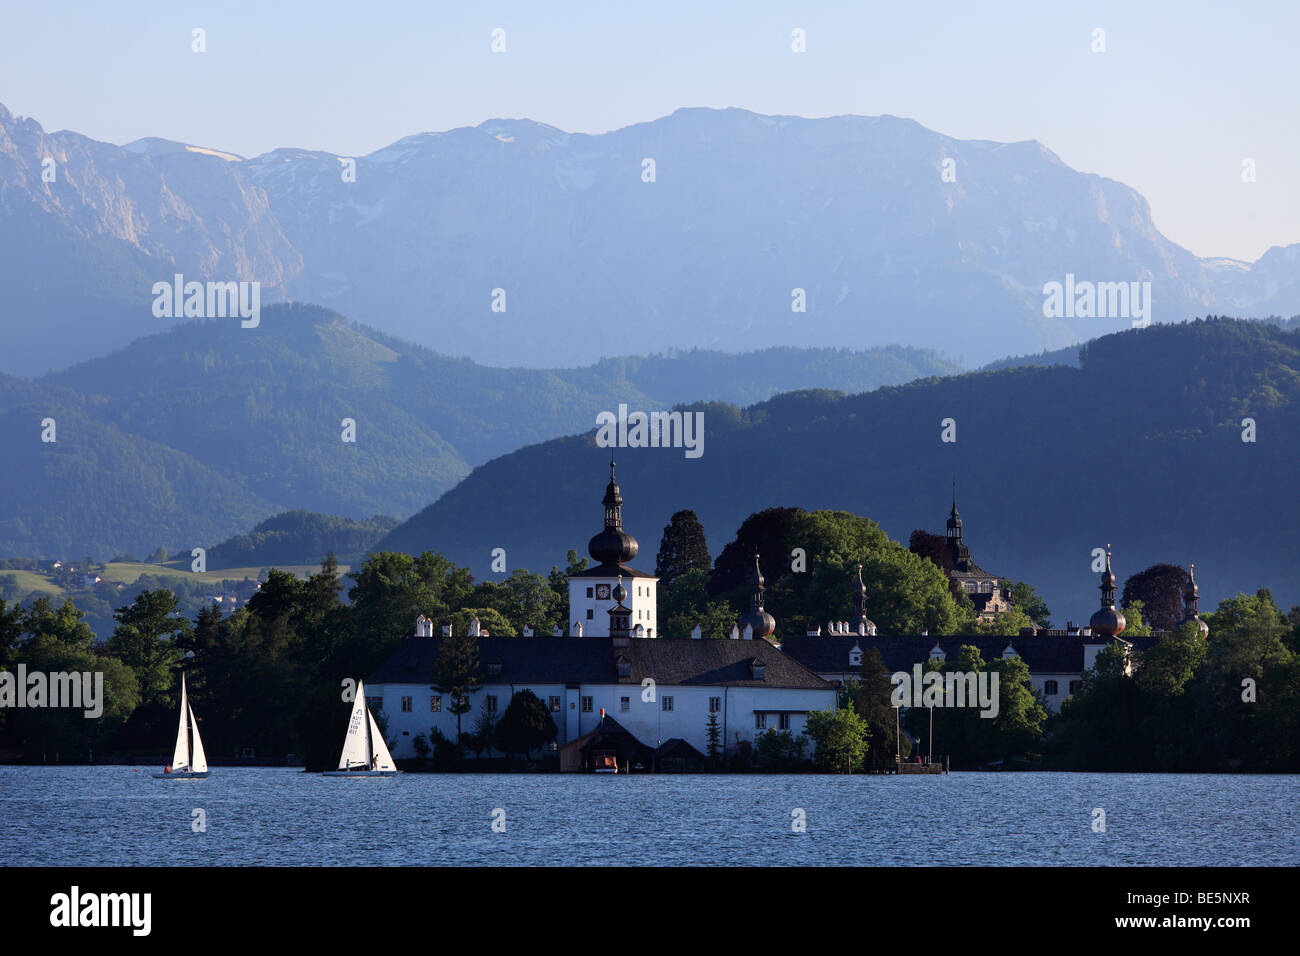 Seeschloss castle and country house Ort in Gmunden, Traunsee lake, Salzkammergut, Upper Austria, Austria, Europe Stock Photo